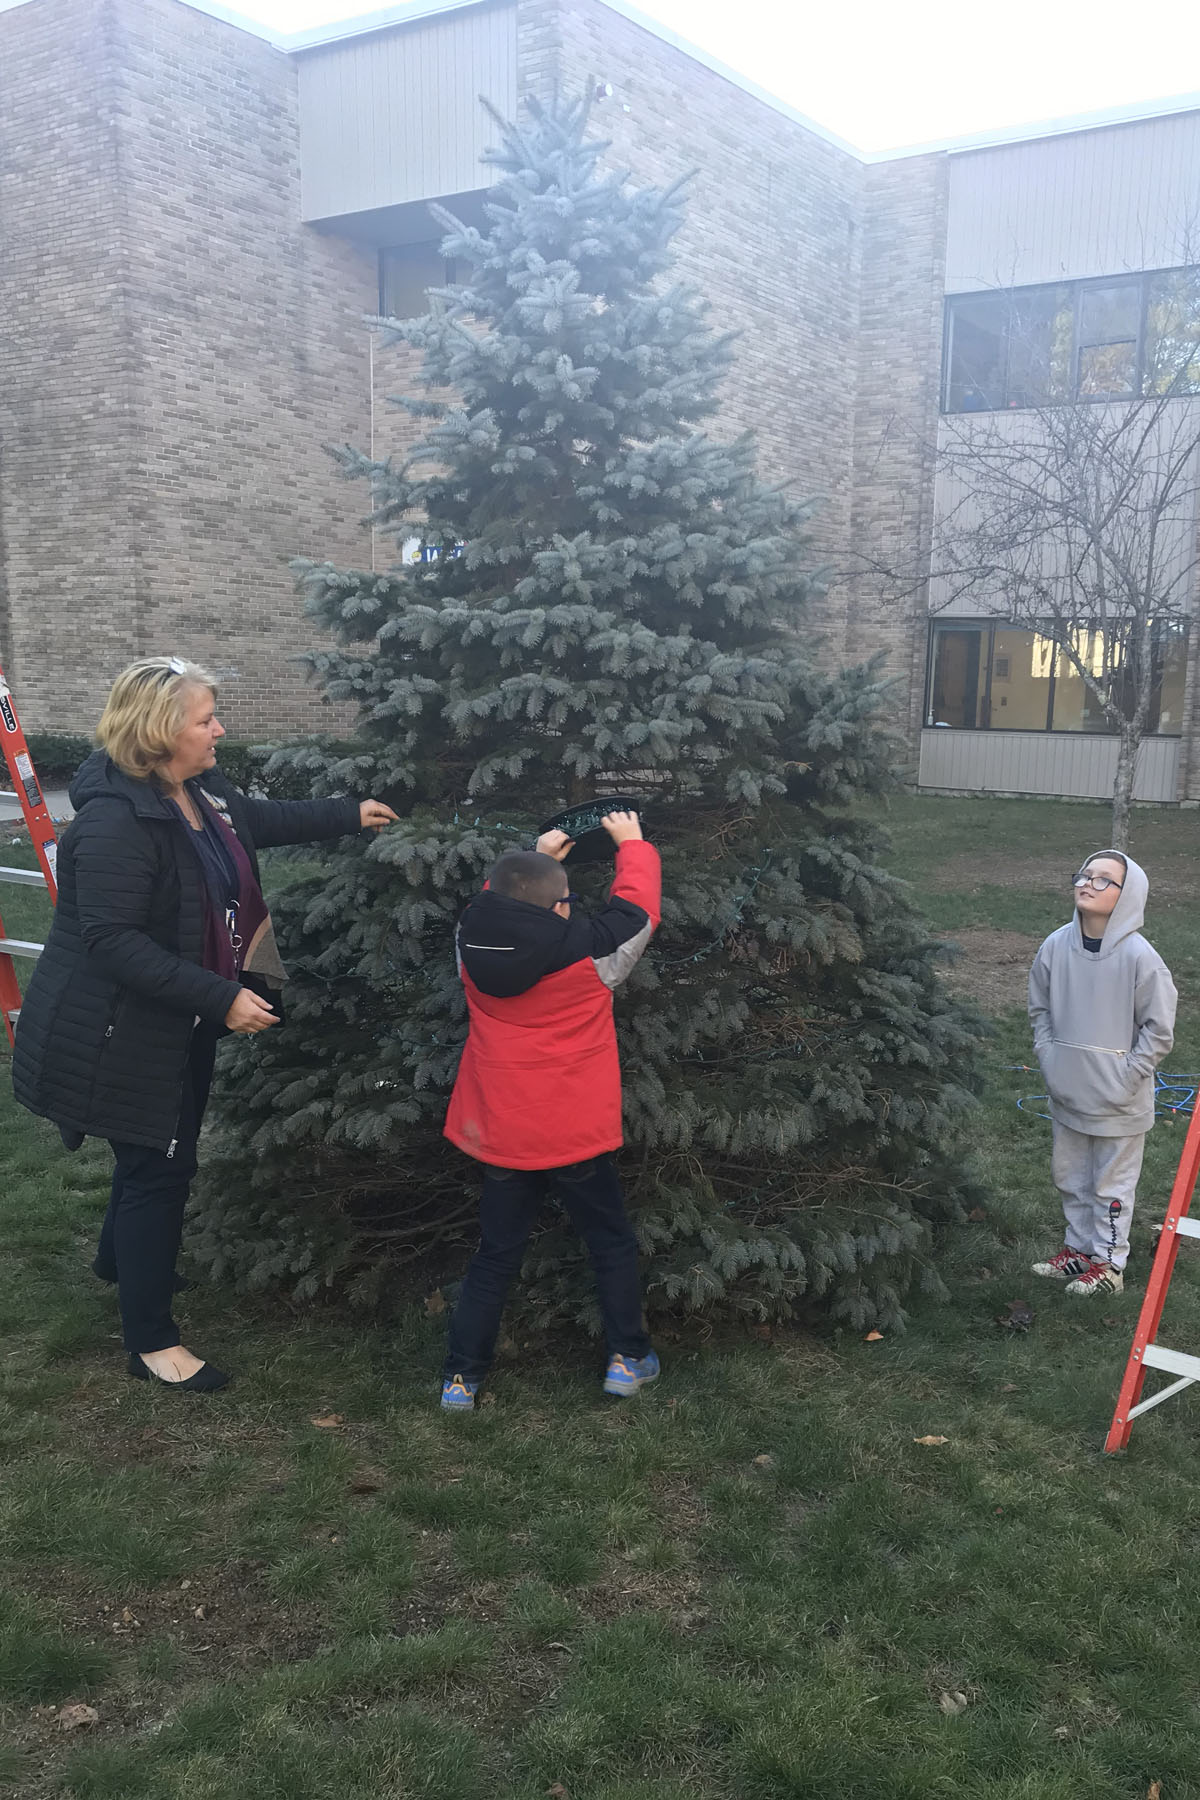 Decorating the tree at Memorial Elementary